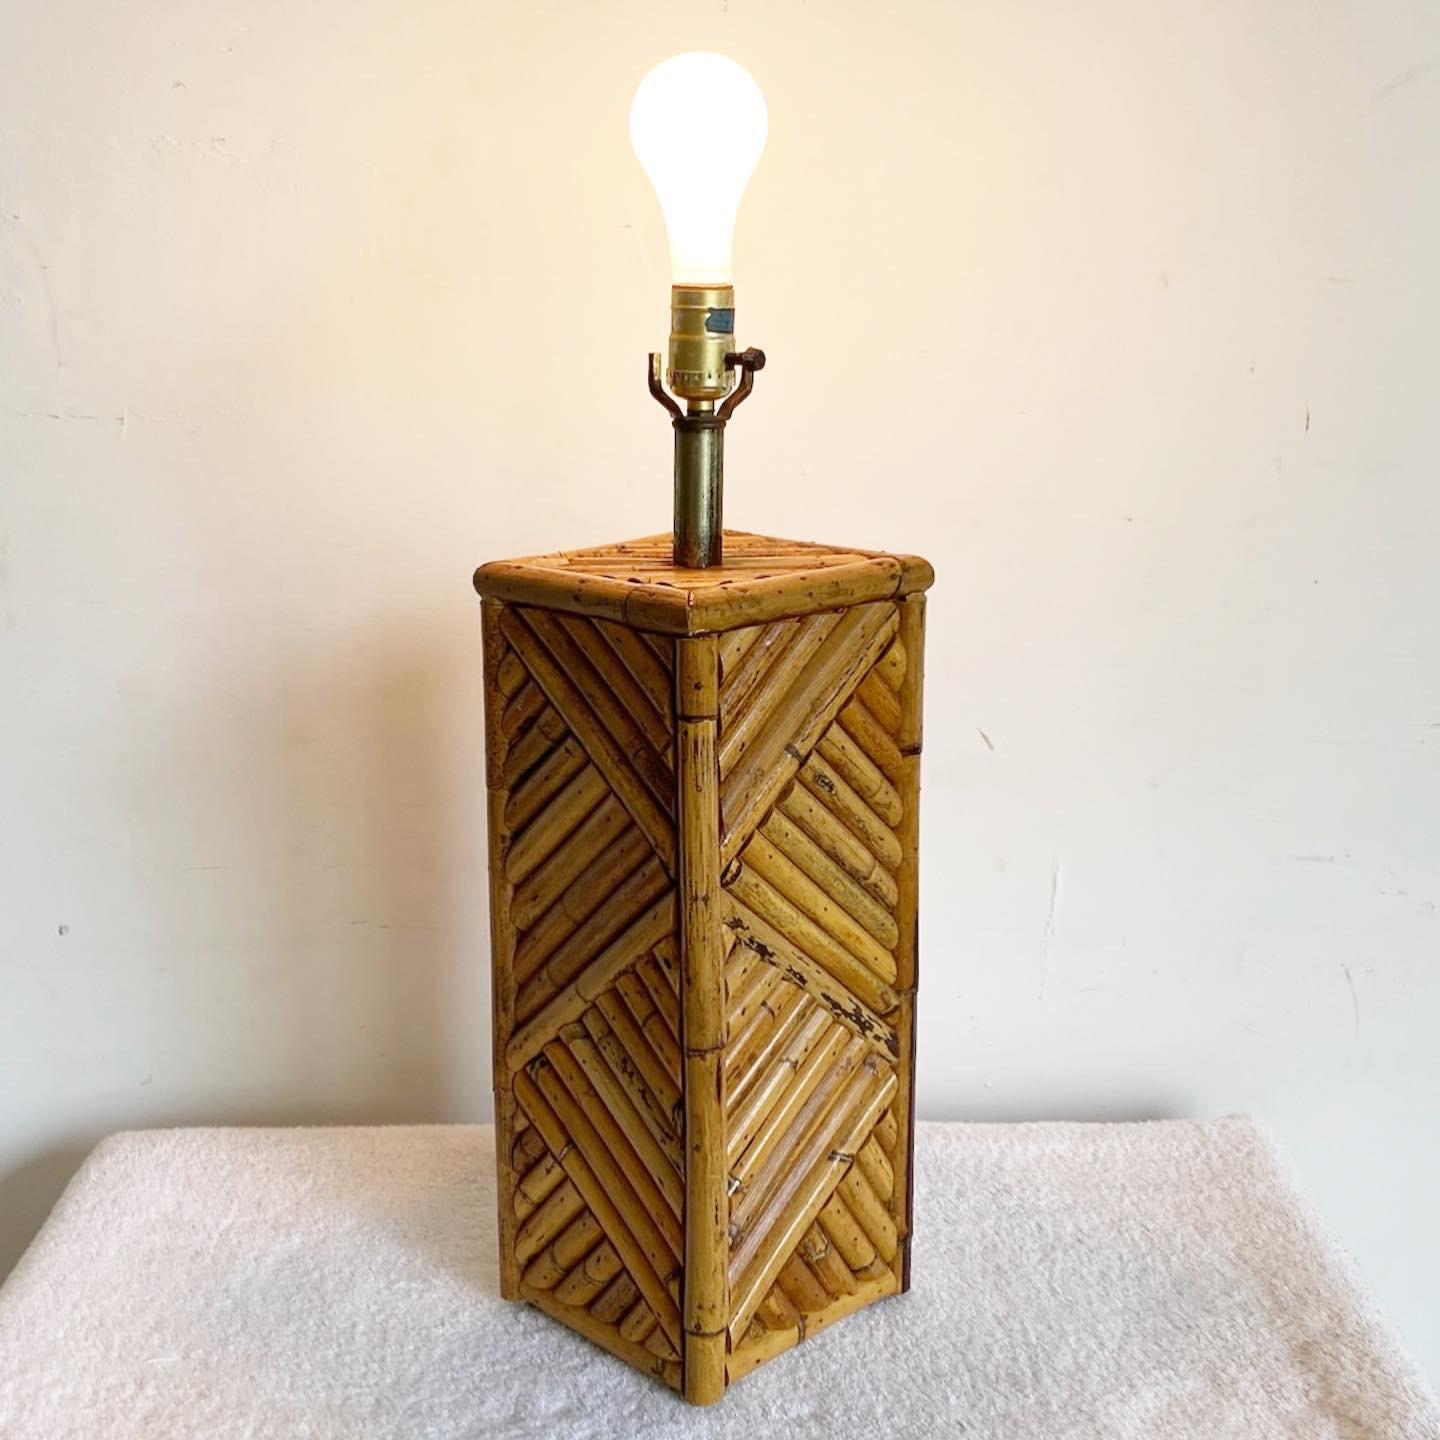 Infuse your space with the enchanting vintage bohemian charm of our handmade split bamboo table lamp. Featuring a fantastic inlaid pattern of bamboo, this lamp adds a touch of natural beauty and illuminates any room with style.

Enchanting vintage